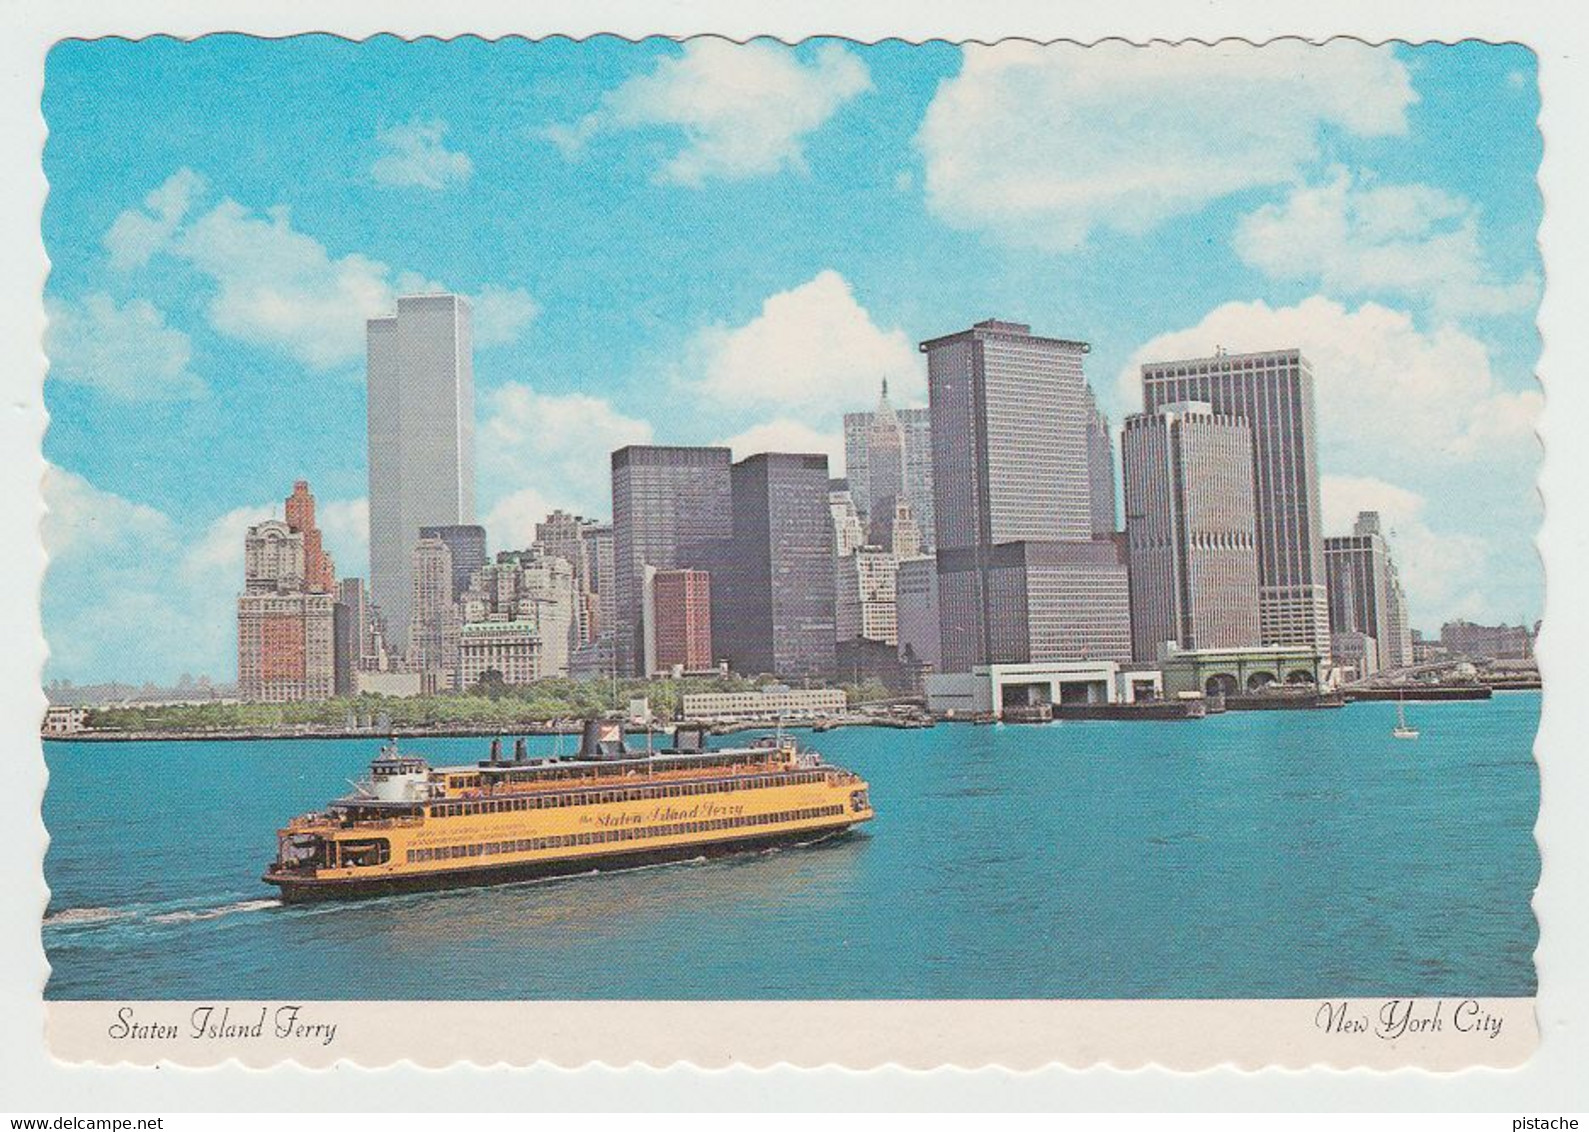 New York City - Staten Island Ferry - By Manhattan Post Card Inc. No D-34646-D - Size 4 X 6 - Unused - 2 Scans - Transport